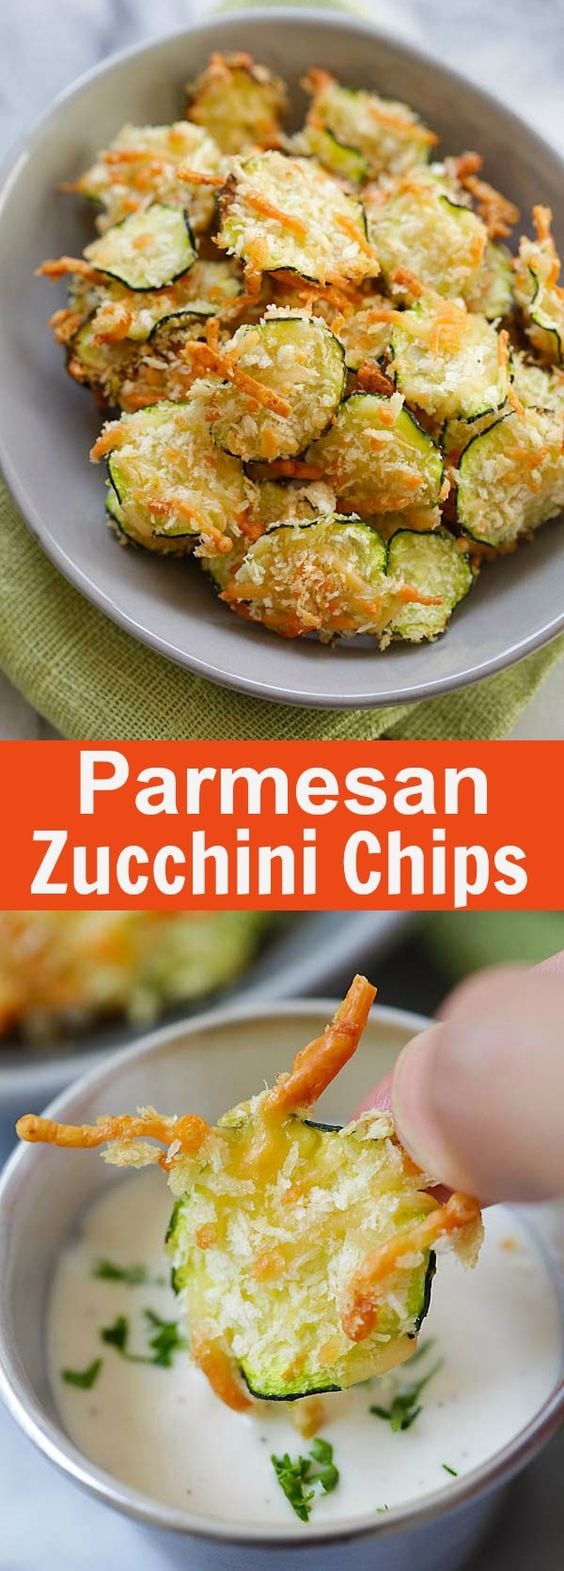 Parmesan Zucchini Chips - crispy zucchini chips coated with Parmesan cheese and bread crumbs. So healthy and low in calories | rasamalaysia.com